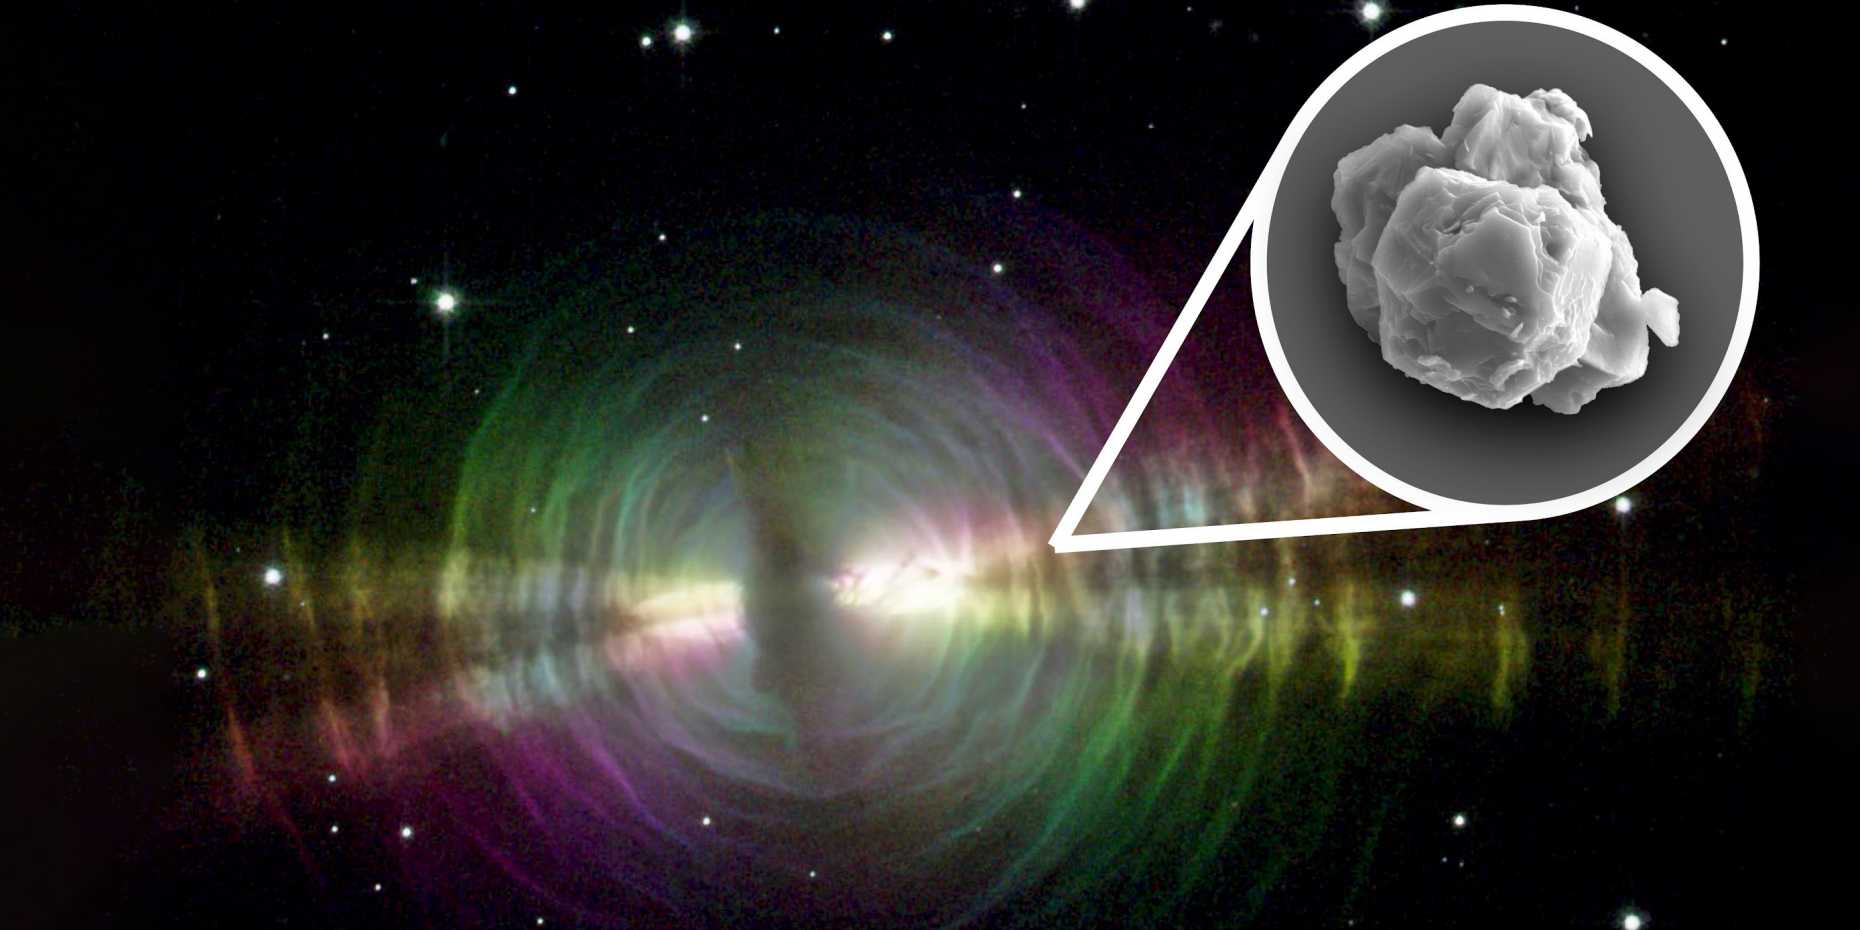 Dust ejected from stars such as the Egg Nebula could be the source of presolar silicon carbide grains (inset) found in meteorites. (Image: NASA, JPL, STSci / Inset: Janaína N. Ávila)